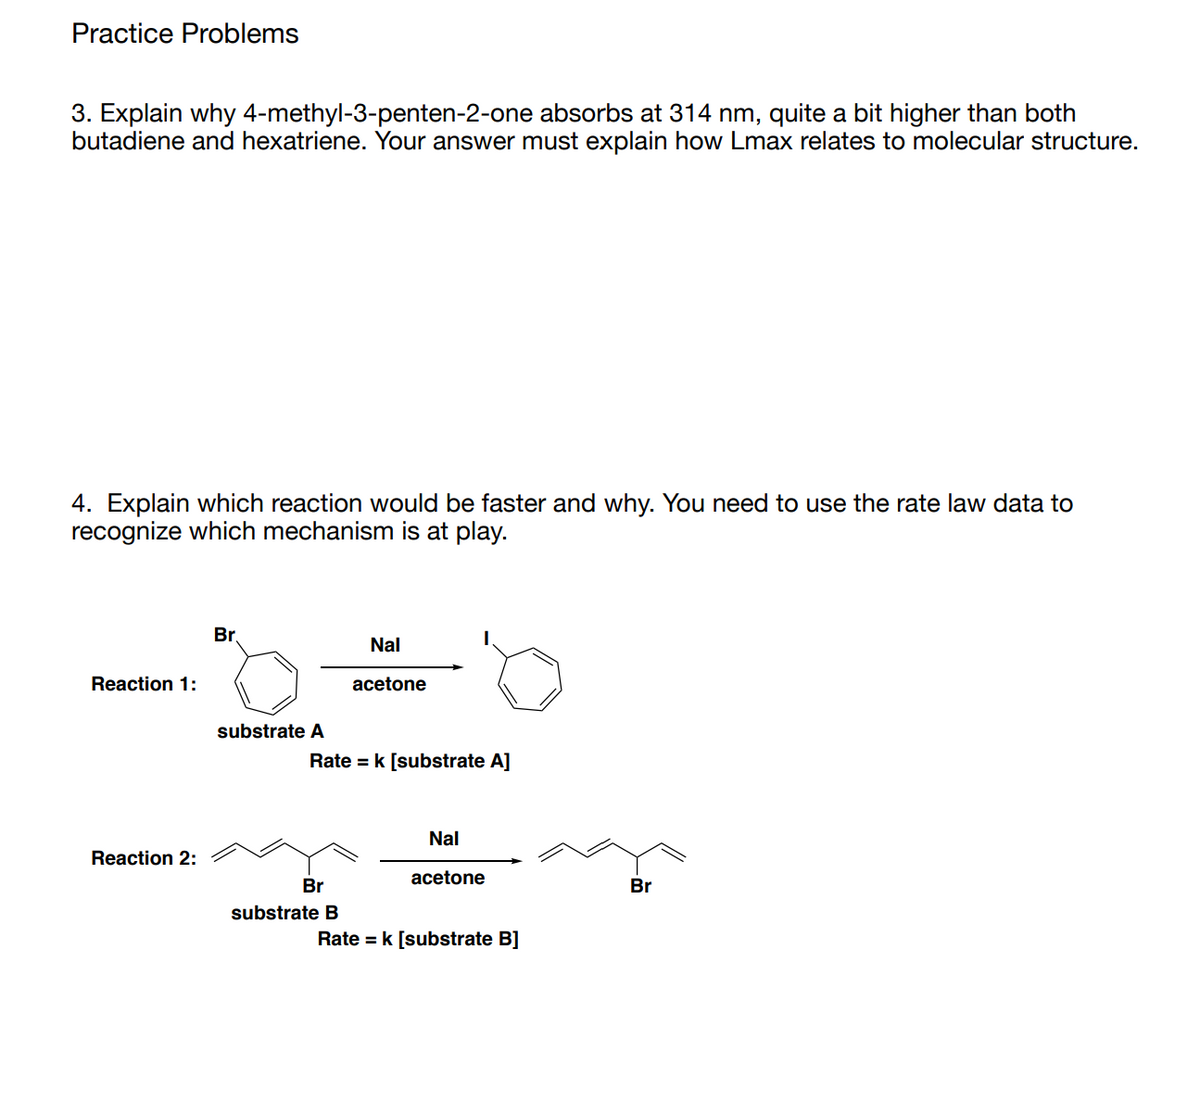 Practice Problems
3. Explain why 4-methyl-3-penten-2-one absorbs at 314 nm, quite a bit higher than both
butadiene and hexatriene. Your answer must explain how Lmax relates to molecular structure.
4. Explain which reaction would be faster and why. You need to use the rate law data to
recognize which mechanism is at play.
Br.
Nal
Reaction 1:
acetone
substrate A
Rate = k [substrate A]
Nal
Reaction 2:
acetone
Br
Br
substrate B
Rate = k [substrate B]
